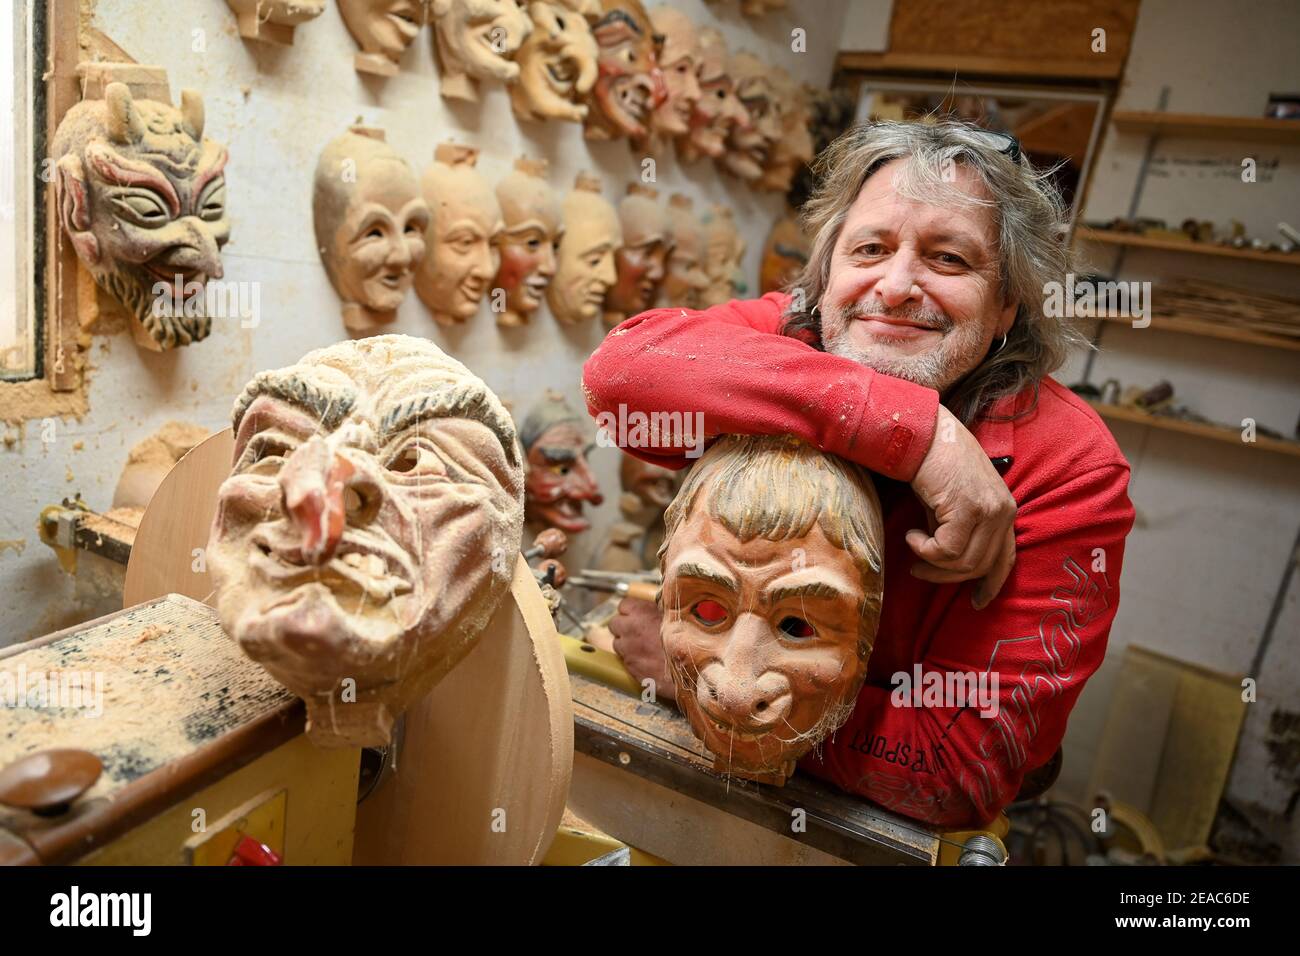 Ravensburg, Germany. 06th Feb, 2021. Jogi Weiß, mask and wood carver, leans  on a mask in his workshop while masks hang on the wall next to him, covered  in wood dust and